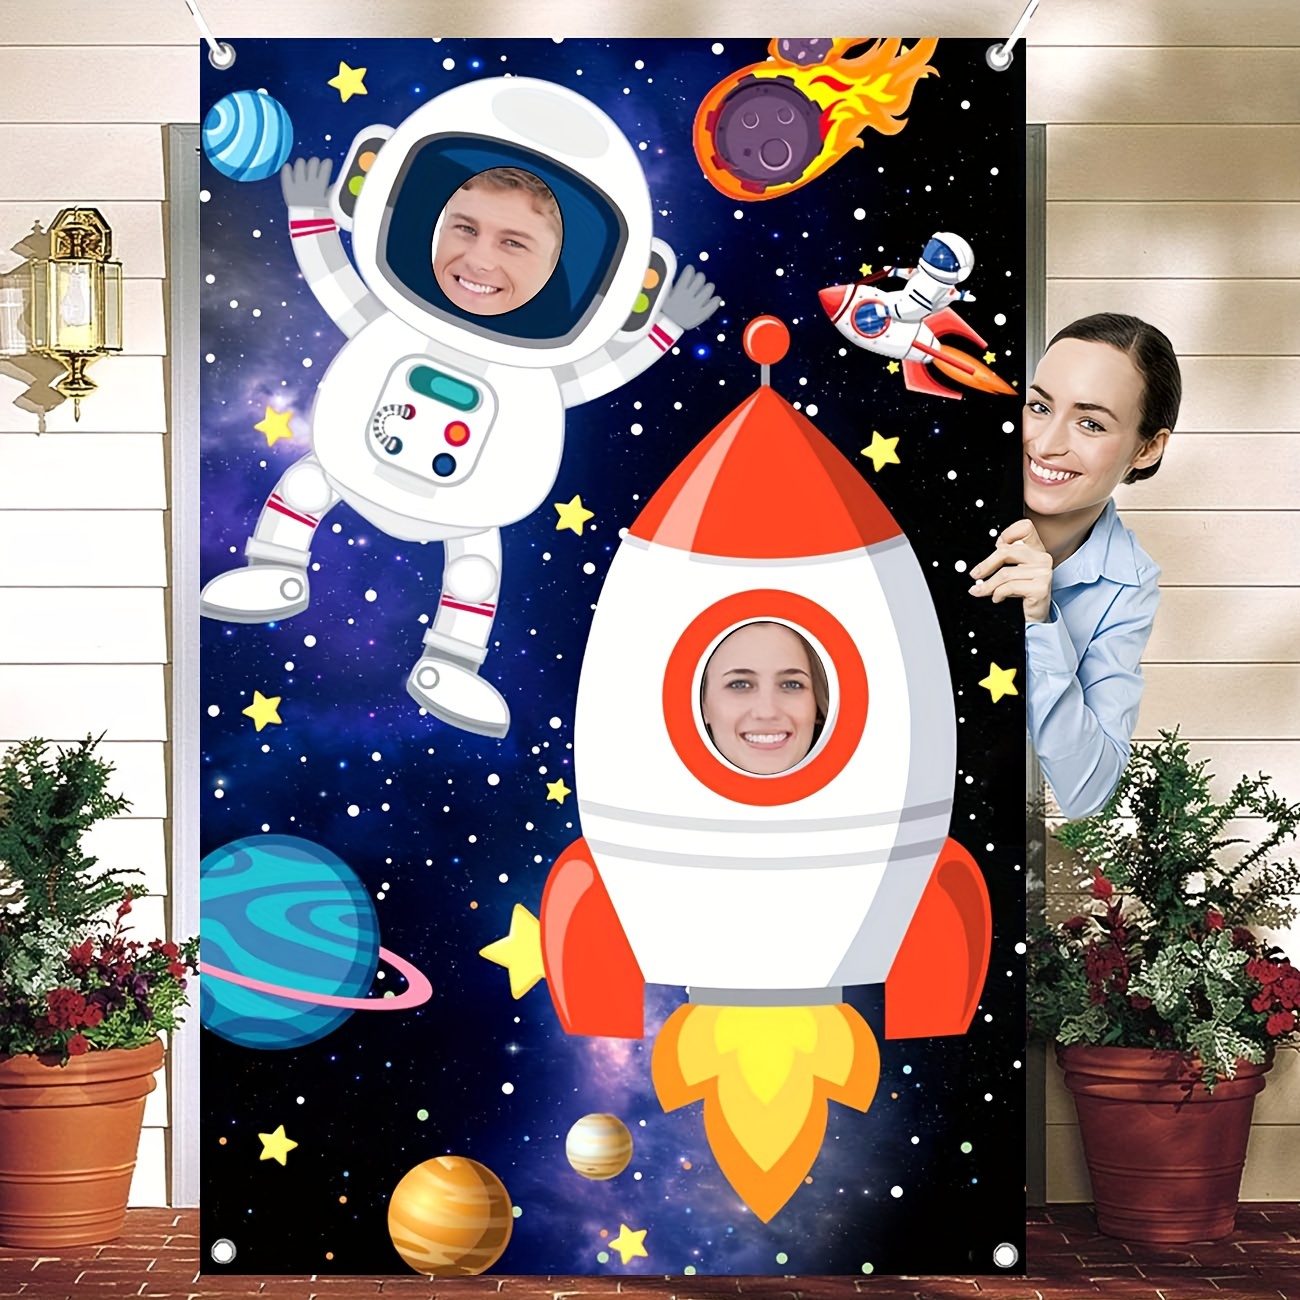 

Space-themed Birthday Party Decorations - Astronaut Photo Booth Props, Planet Backdrop Banner For Boys' Celebration